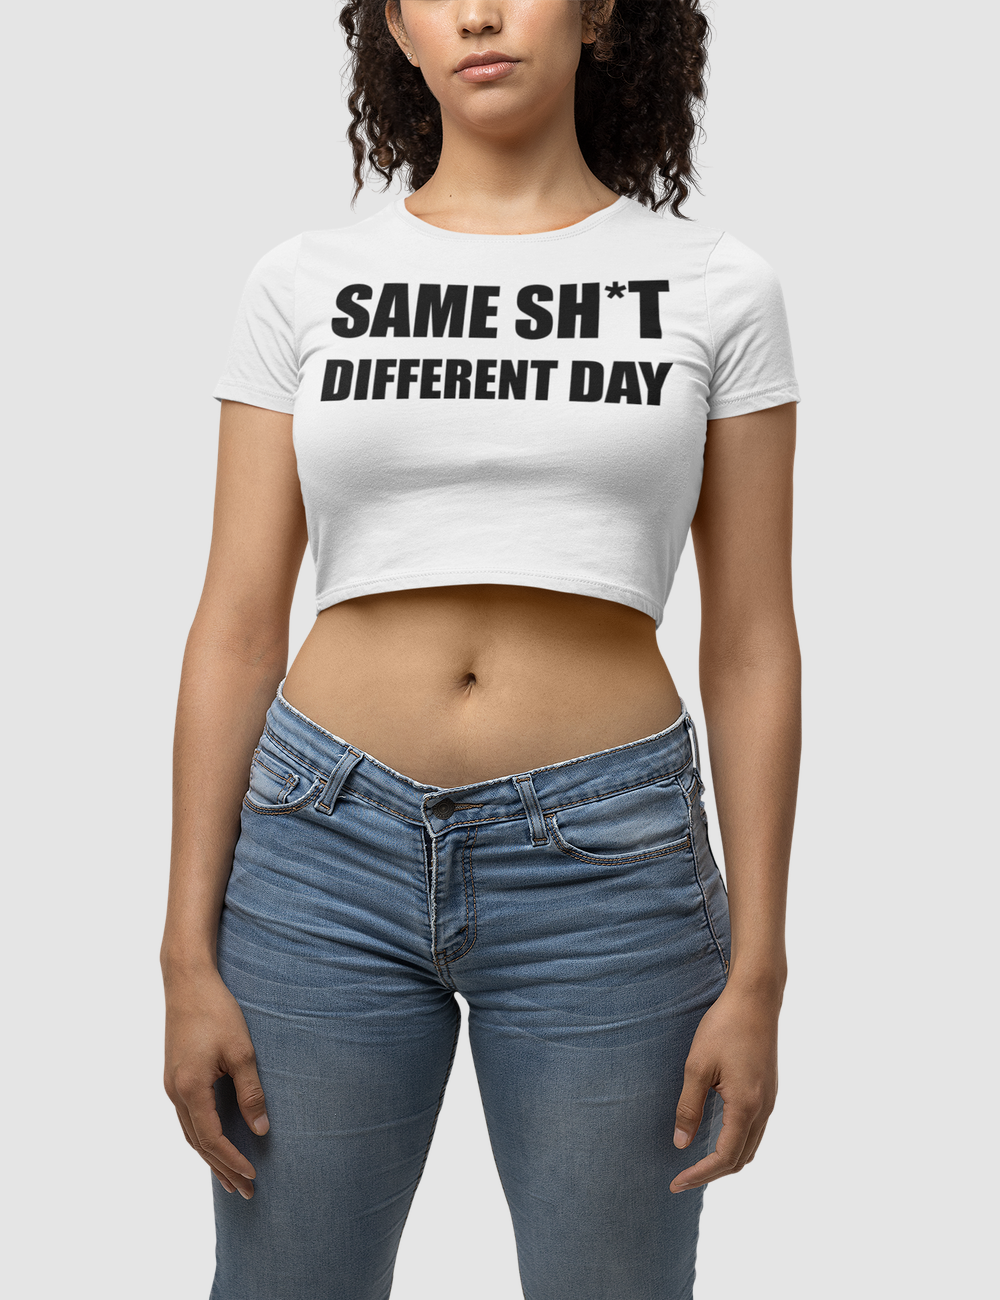 Same Shit Different Day Women's Fitted Crop Top T-Shirt OniTakai